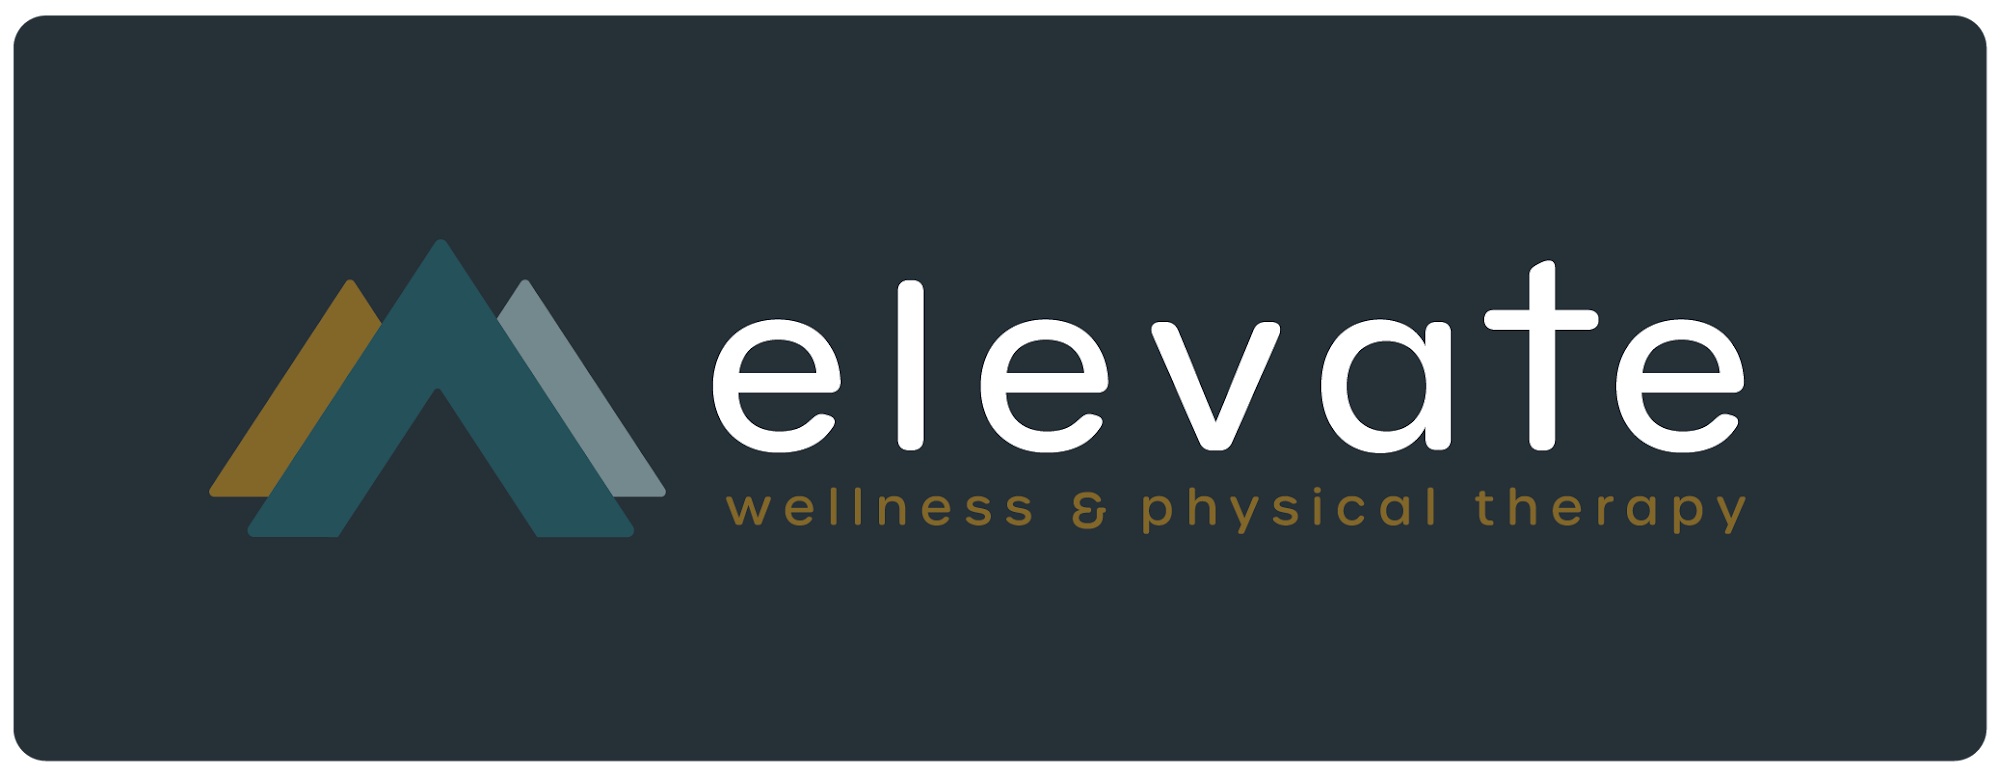 Elevate Wellness and Physical Therapy 801 W C St Suite #3, McCook Nebraska 69001